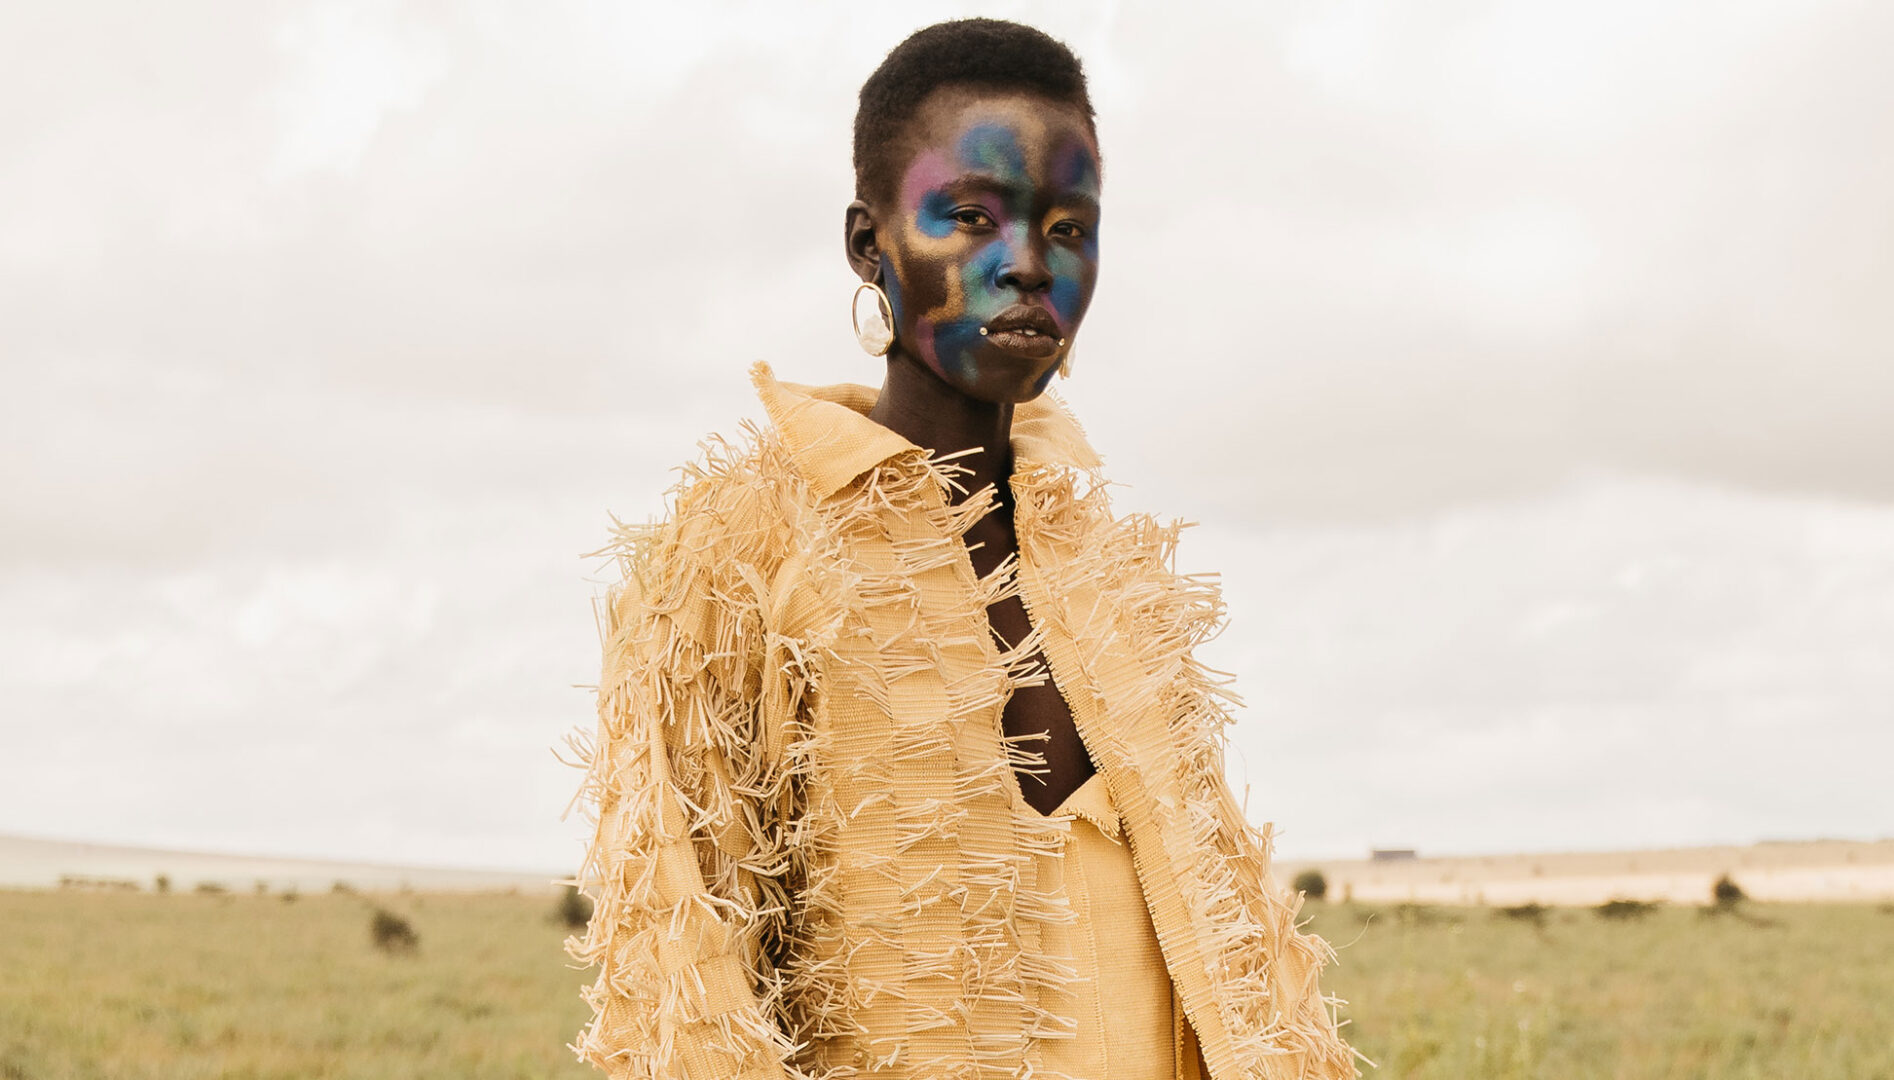 Photo of a black model with iridescent face paint and a yellow fringe jacket standing against a cloudy sky and grassy landscape